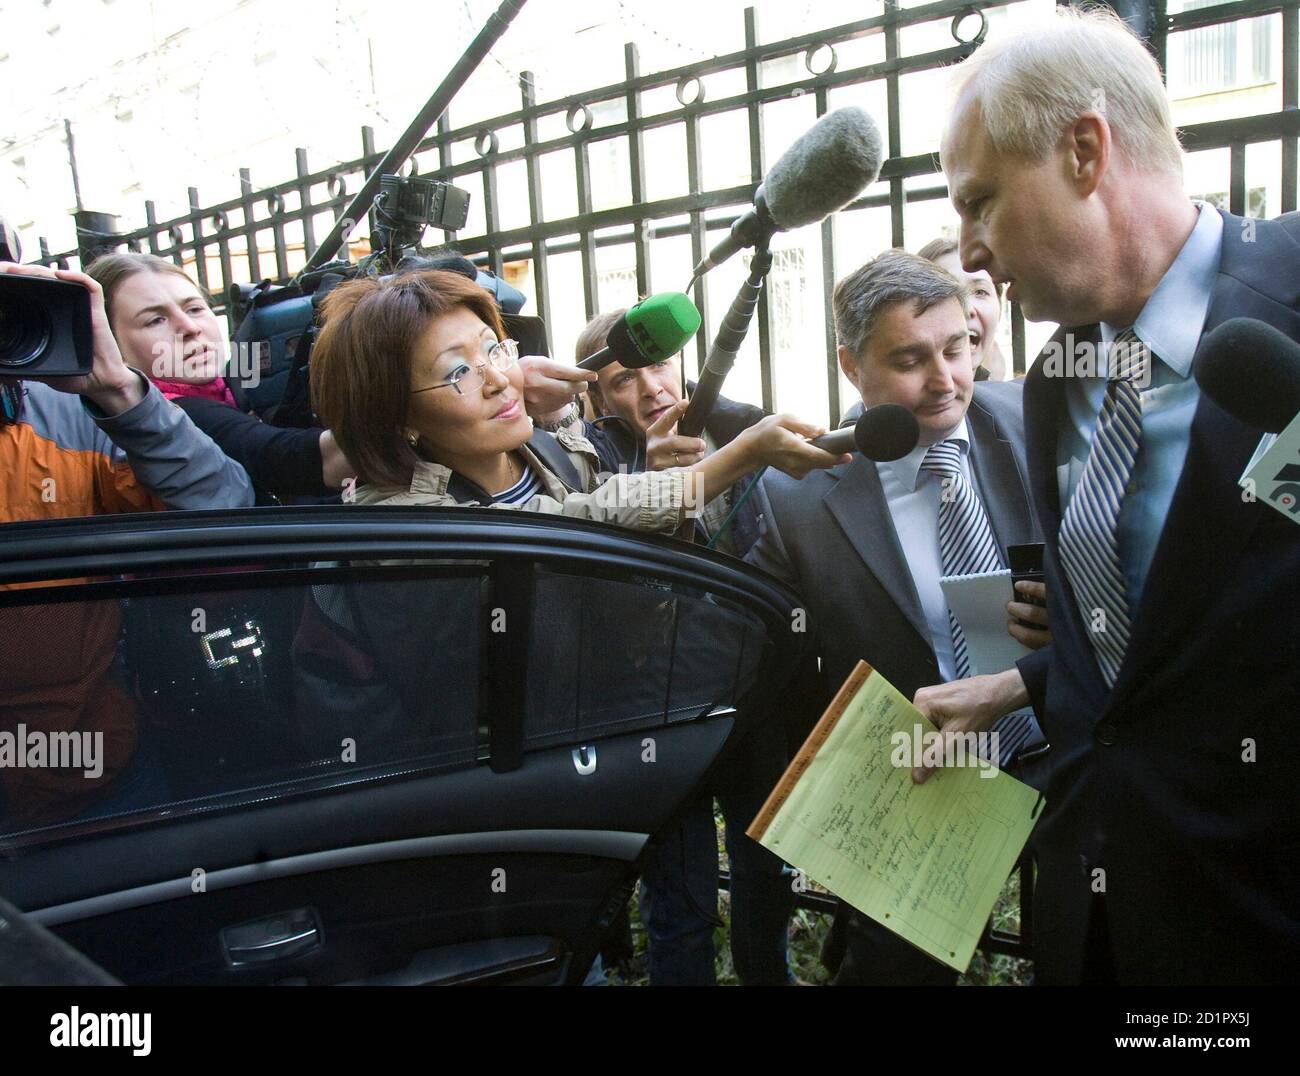 TNK-BP Chief Executive Robert Dudley (R) speaks to reporters after leaving a local interior ministry office in Moscow June 10, 2008. The chief executive of oil major BP's Russian joint venture said on Tuesday his questioning by the authorities as part of a tax probe was a routine matter.  REUTERS/Alexander Natruskin  (RUSSIA) Stock Photo